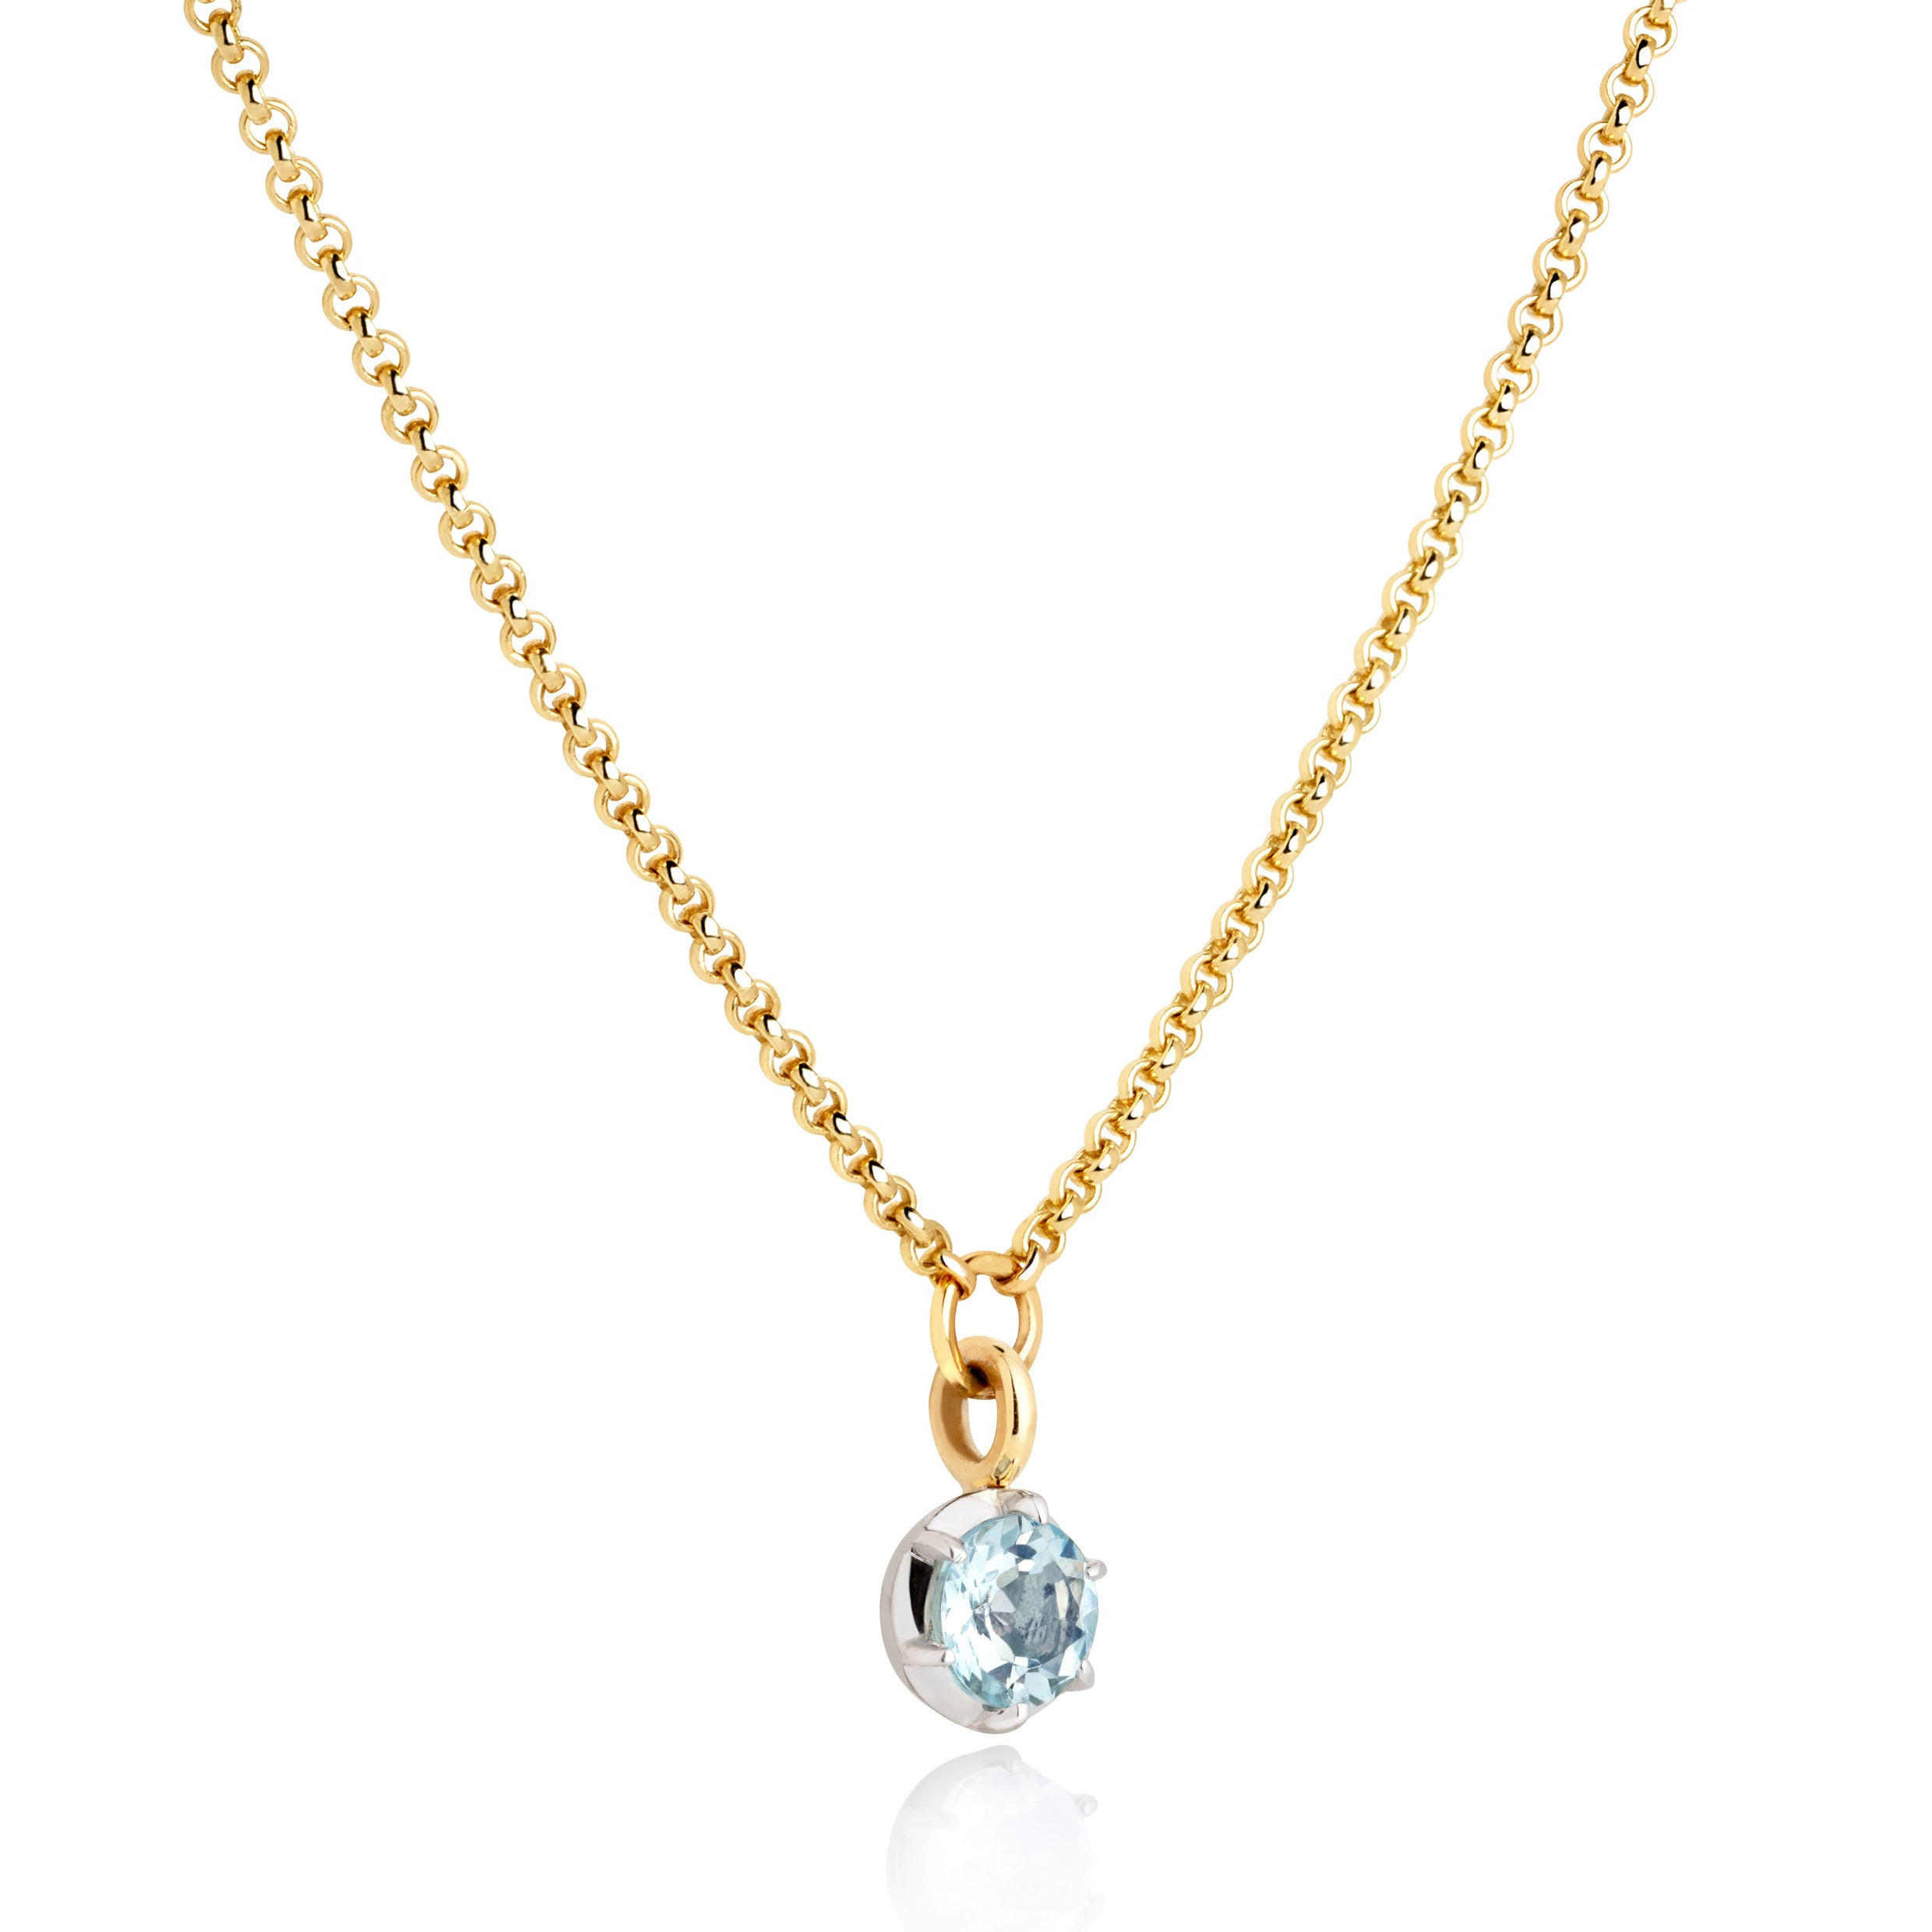 March Birthstone 0.50ct Aquamarine in White and Yellow Gold Georgian Inspired Necklace